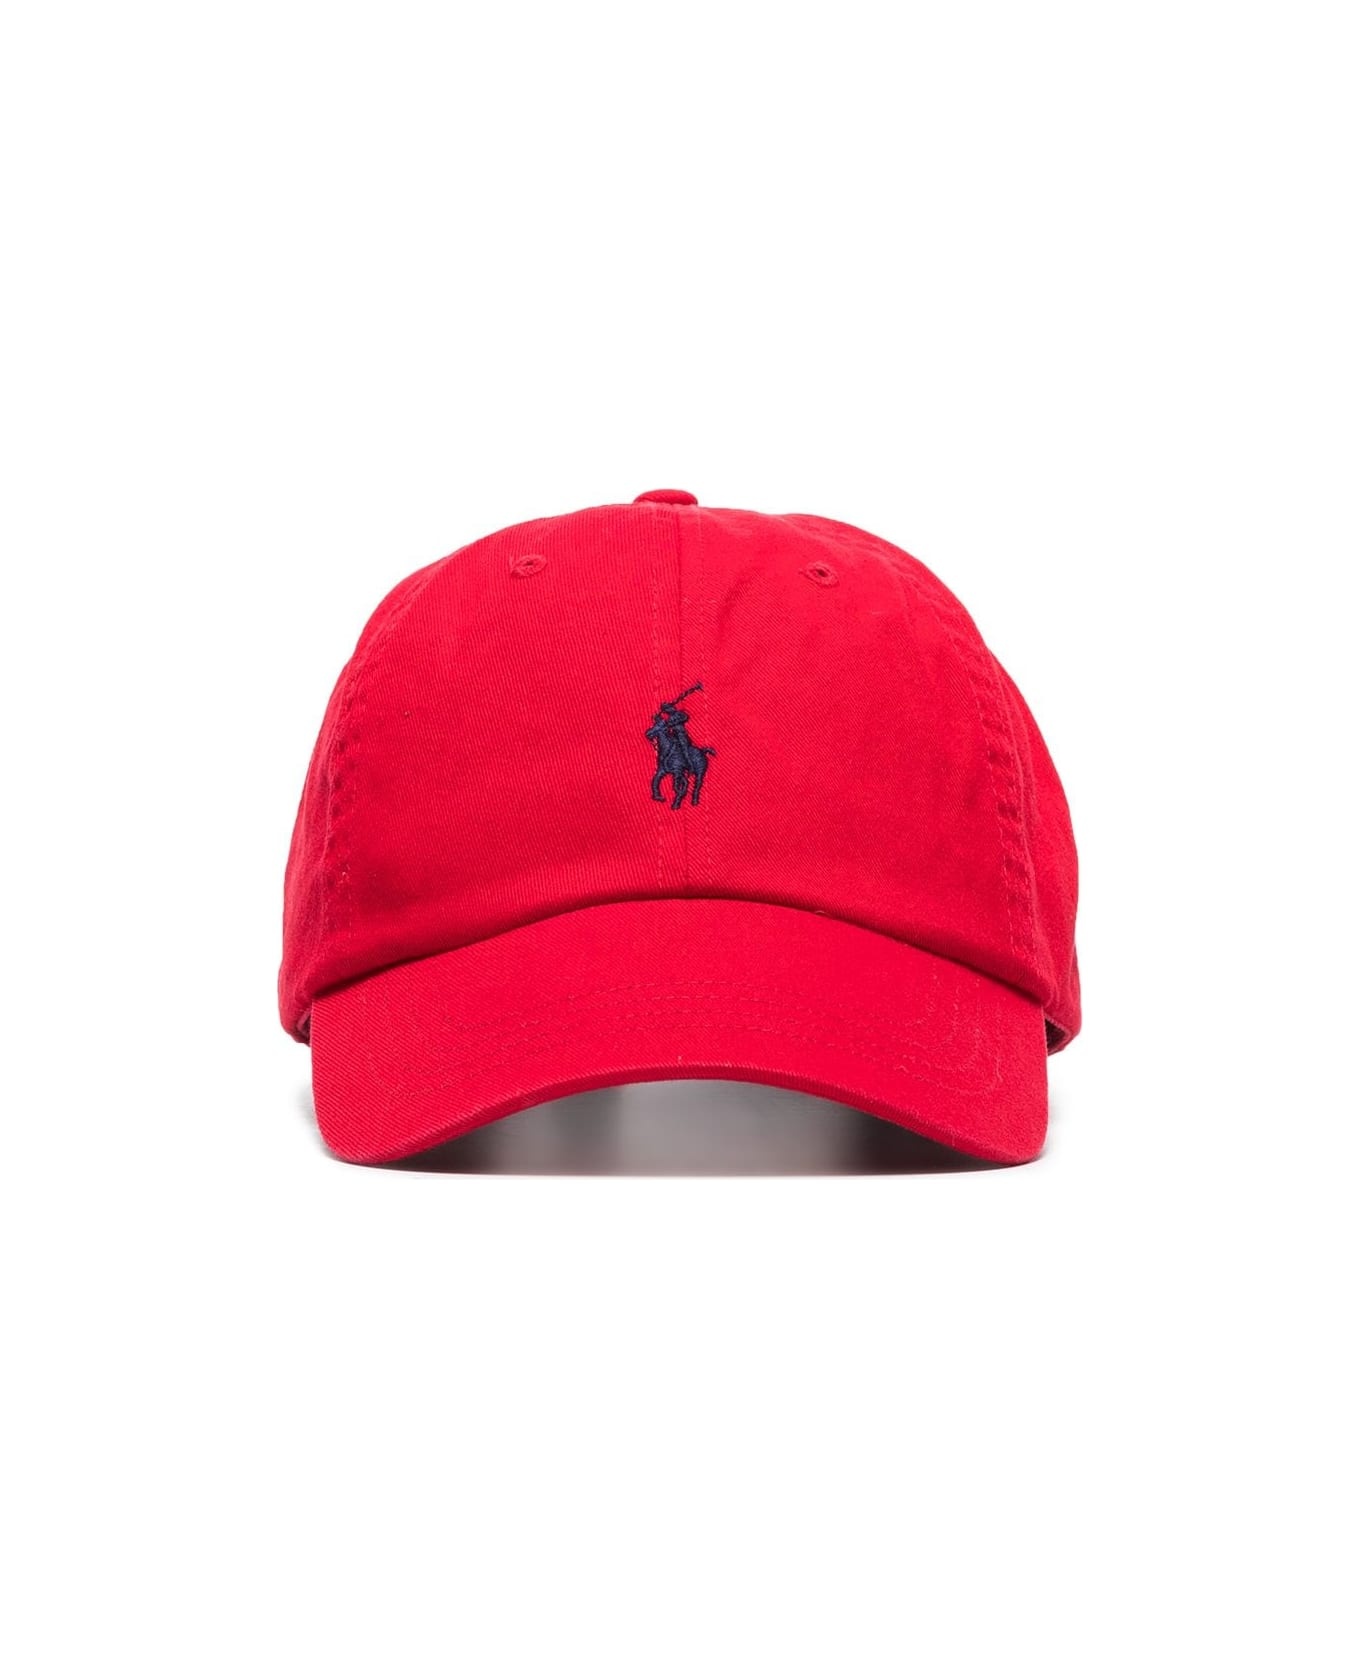 Red Baseball Hat With Blue Pony - 1